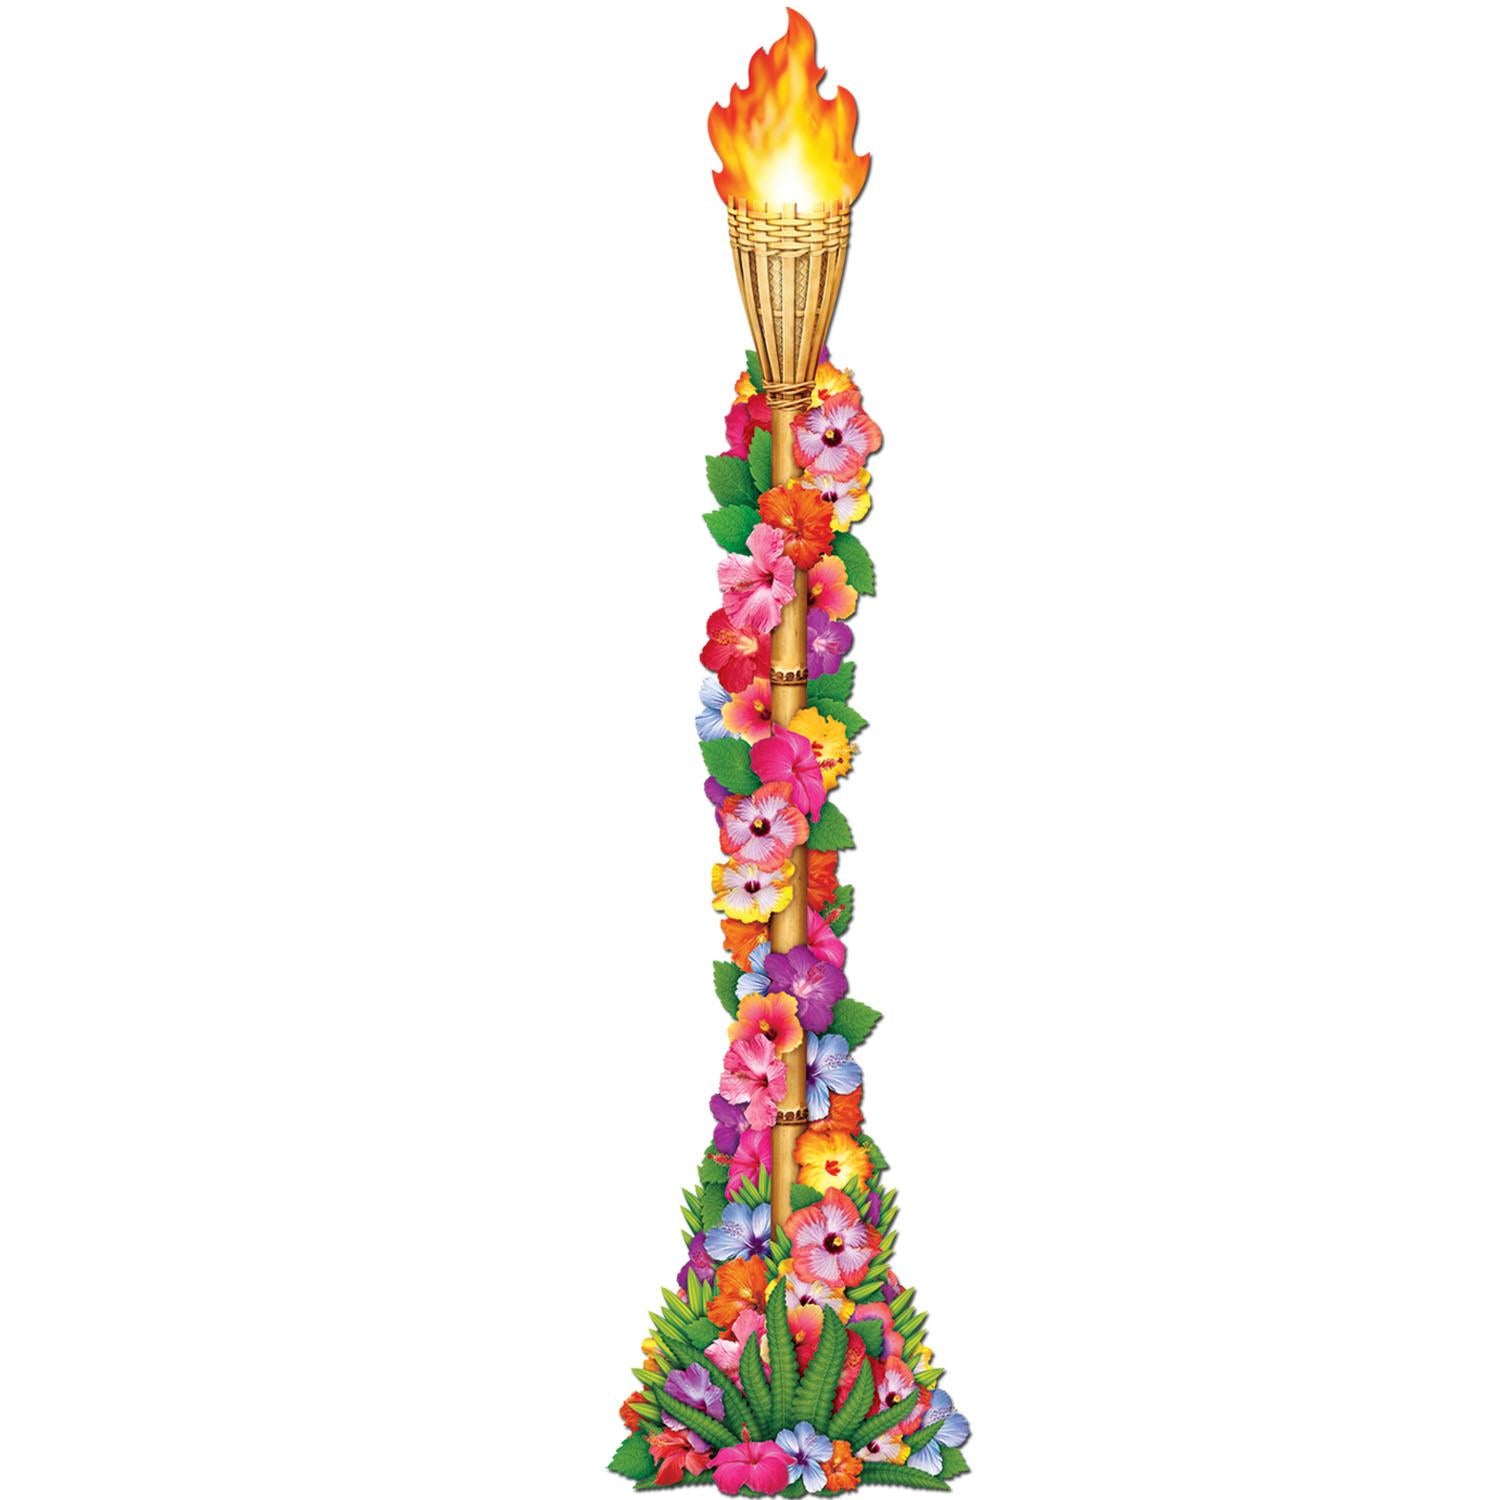 Beistle Luau Party Jointed Floral Tiki Torch